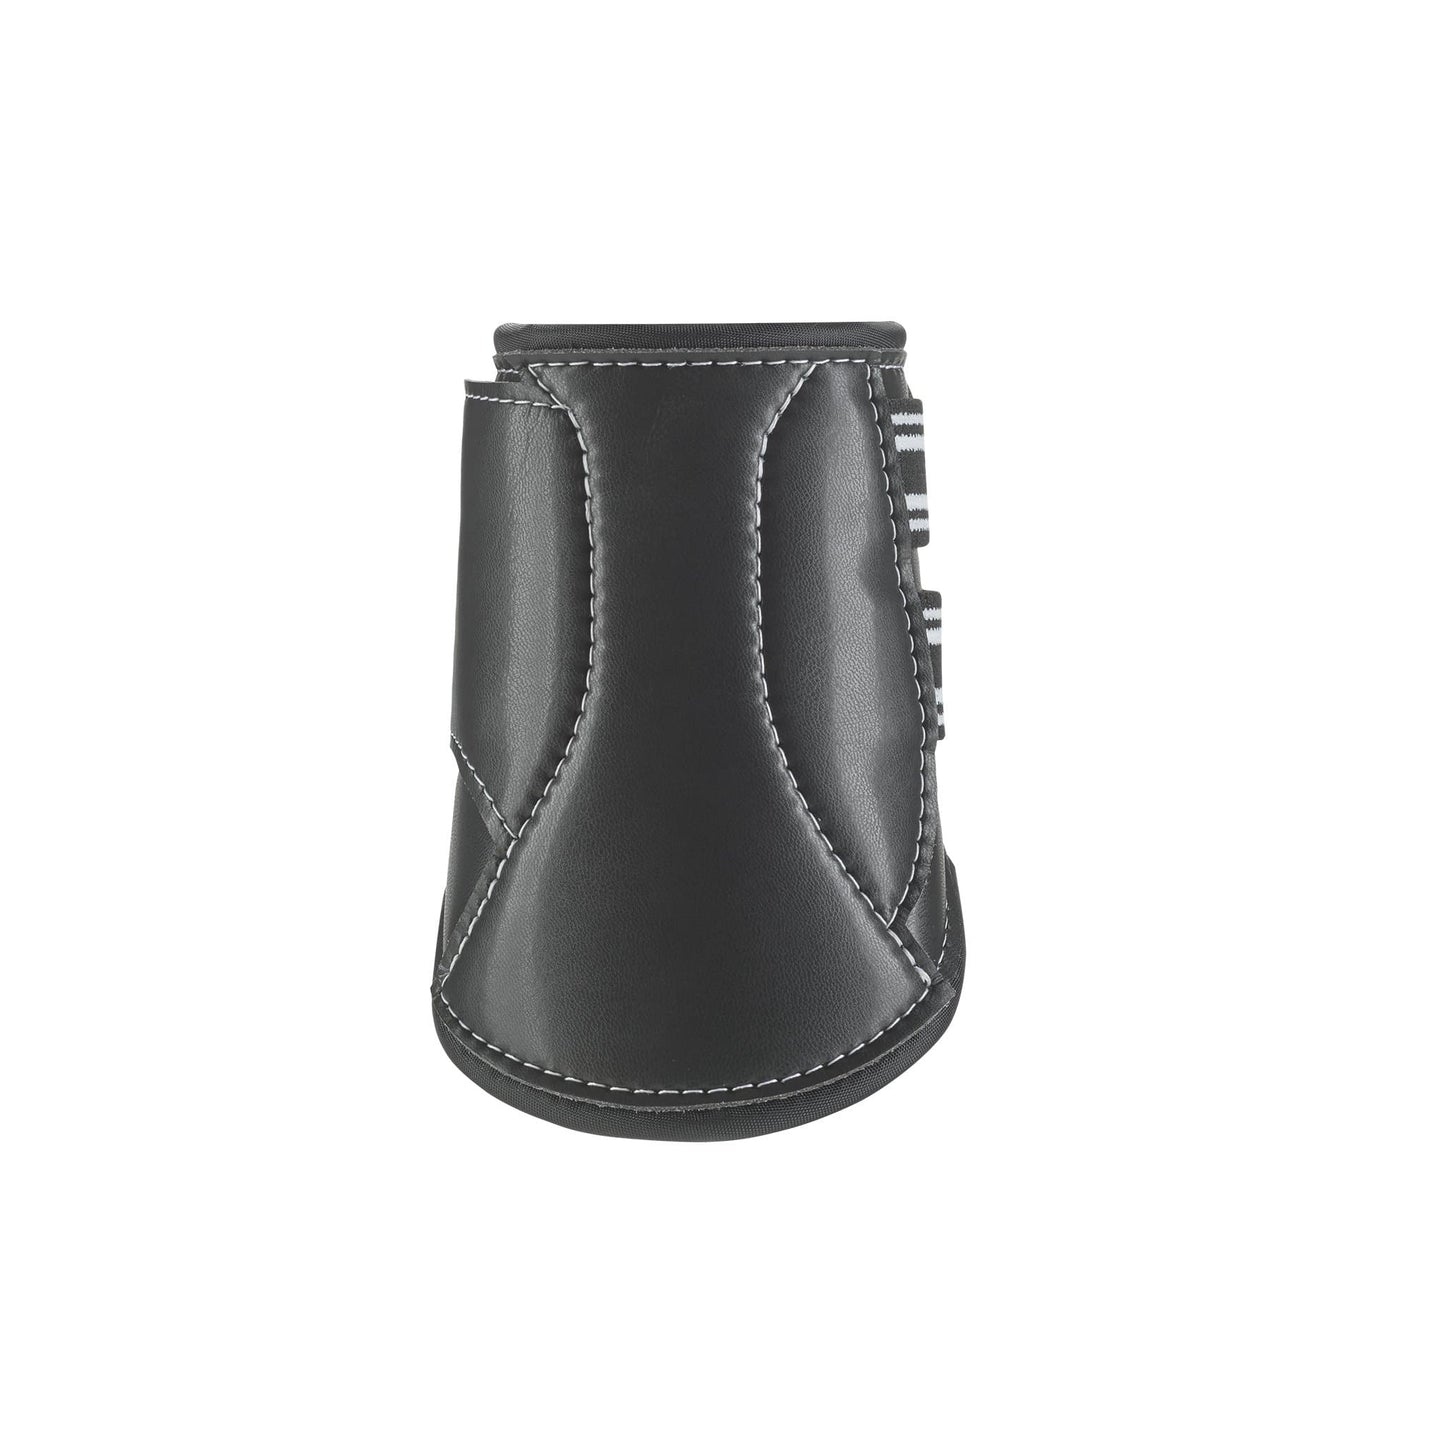 Equifit Multiteq short hind boots